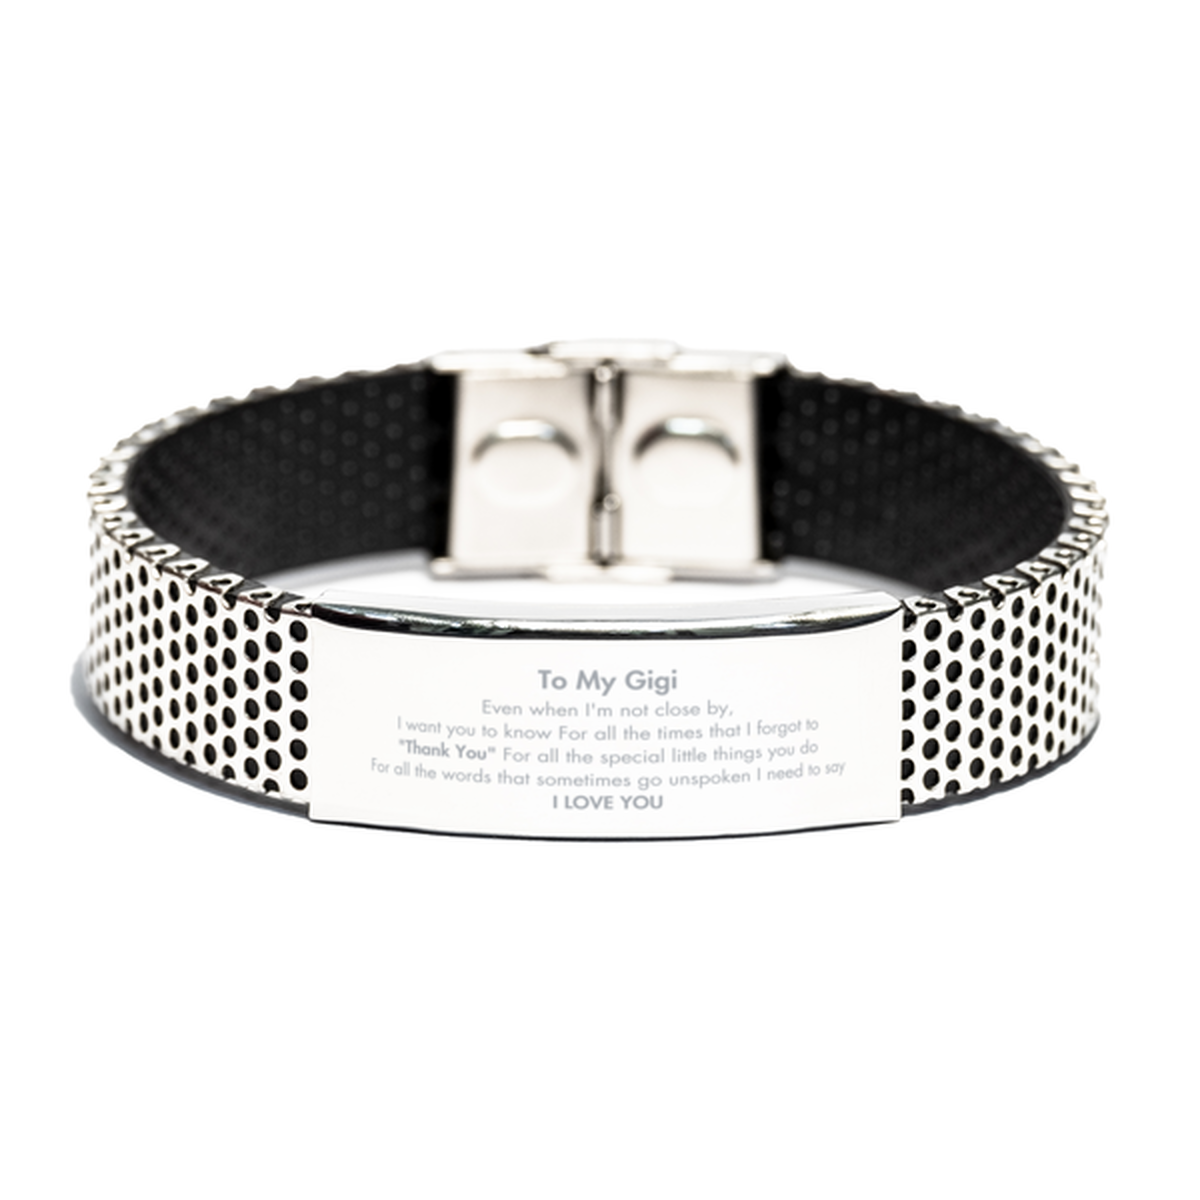 Thank You Gifts for Gigi, Keepsake Stainless Steel Bracelet Gifts for Gigi Birthday Mother's day Father's Day Gigi For all the words That sometimes go unspoken I need to say I LOVE YOU